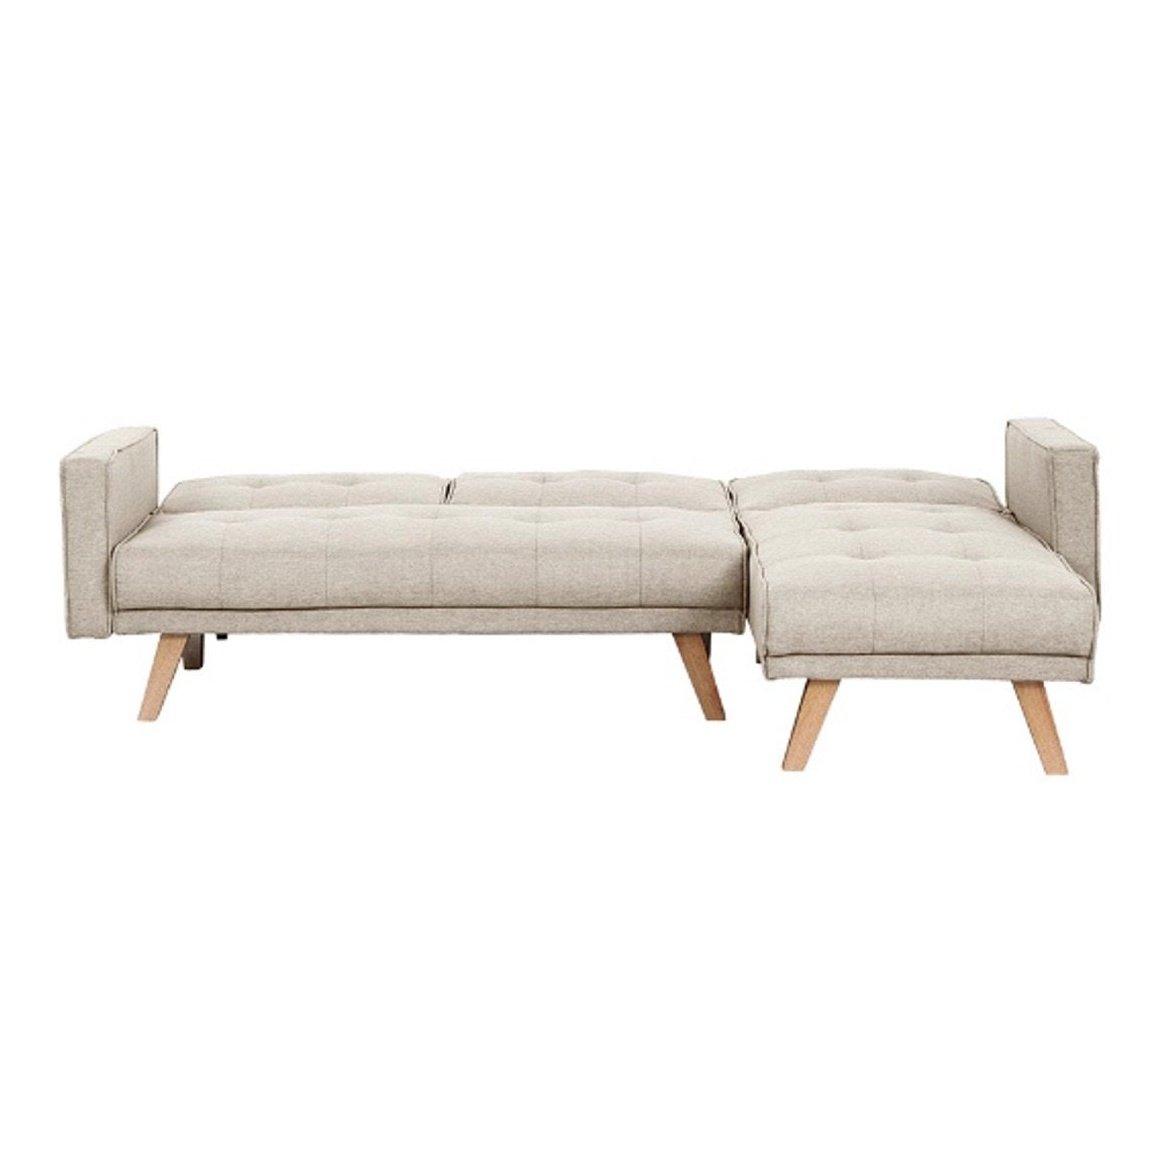 Tyson Sofa bed folded out - beige fabric | Manor Interiors